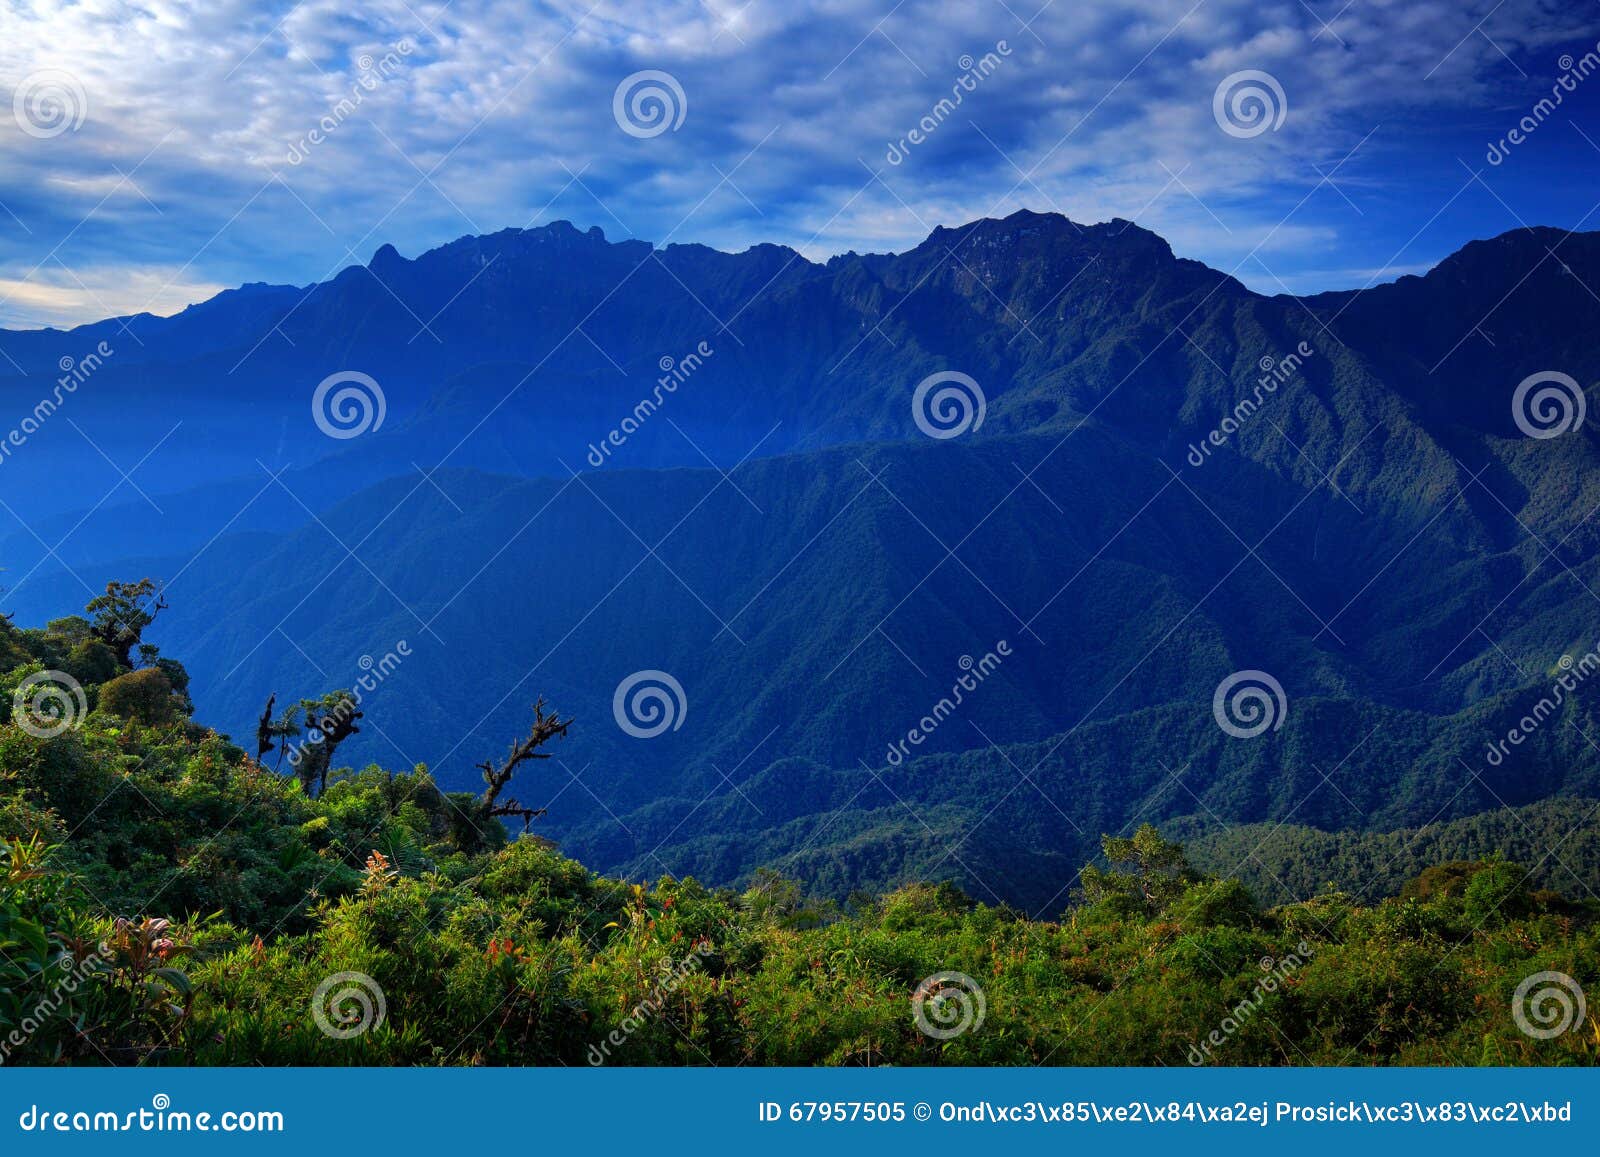 moutain tropical forest with blue sky and clouds,tatama national park, high andes mountains of the cordillera, colombia